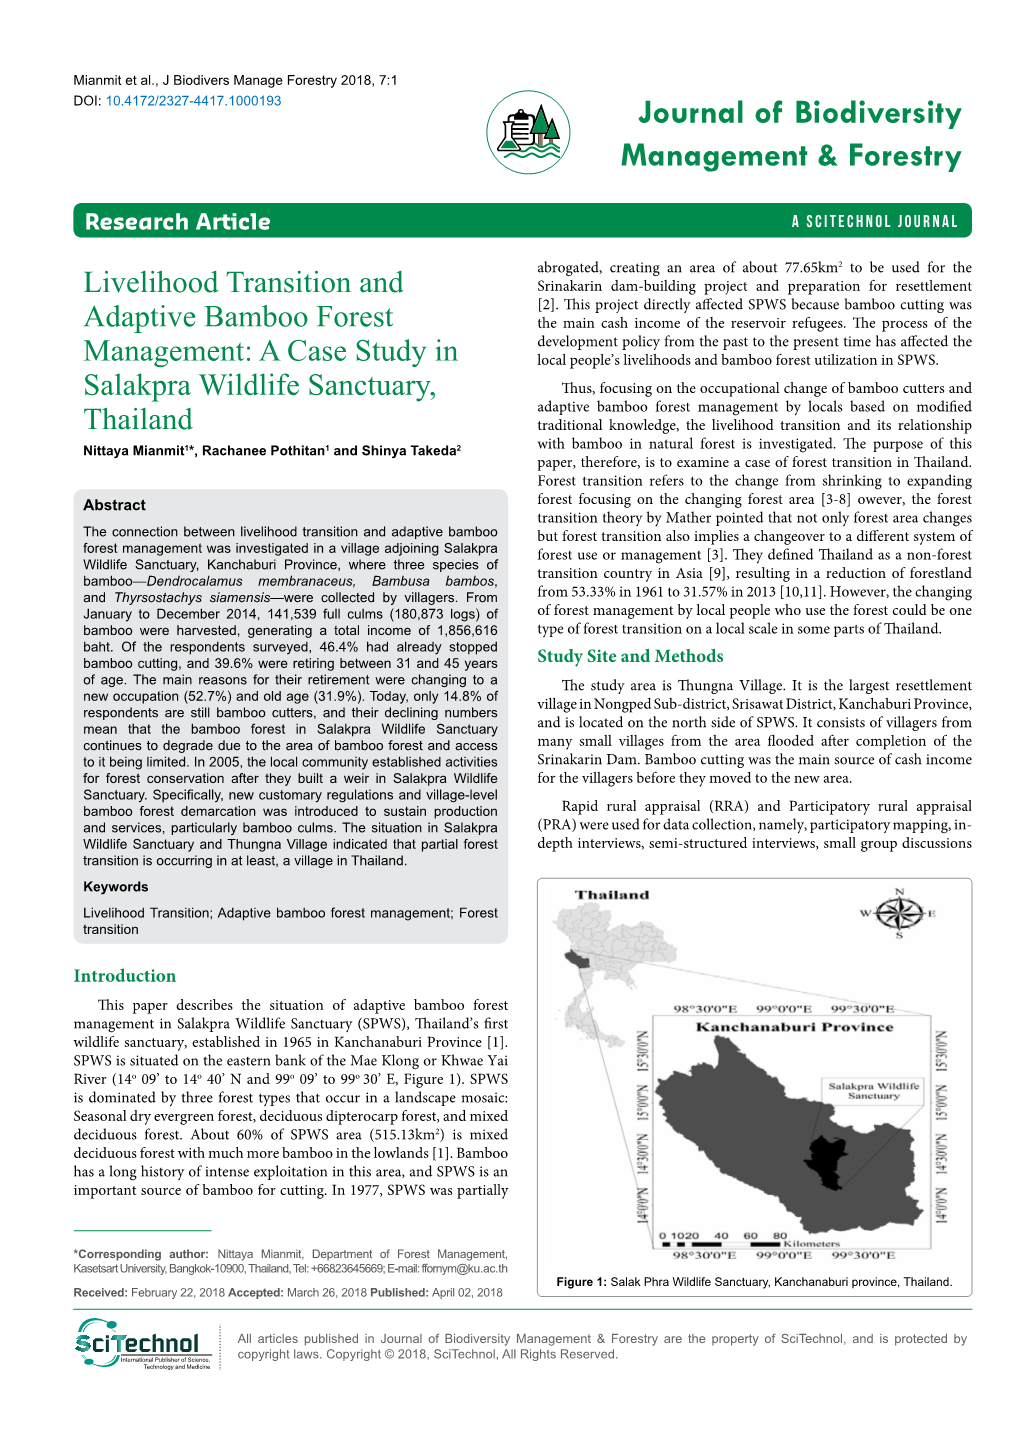 Livelihood Transition and Adaptive Bamboo Forest Management: a Case Study in Salakpra Wildlife Sanctuary, Thailand